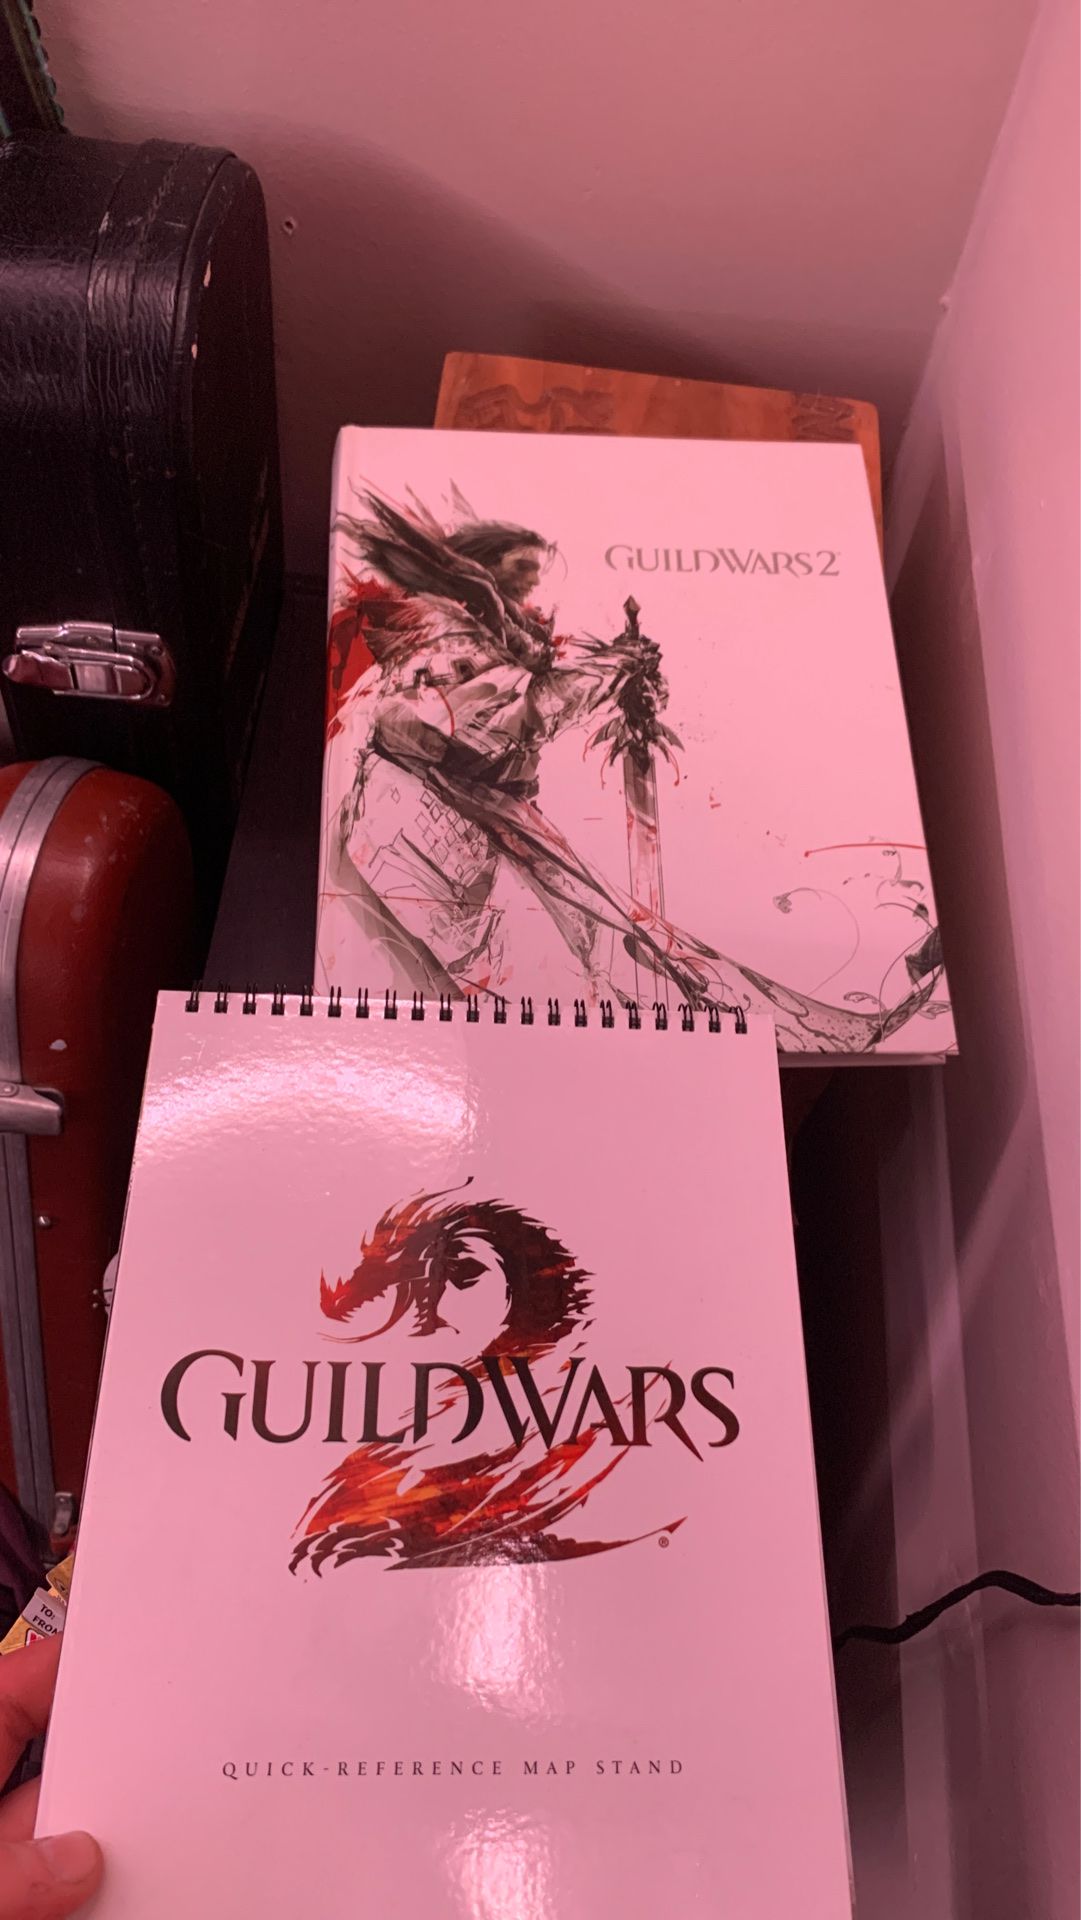 Guild Wars 2 collectors guide and map stand